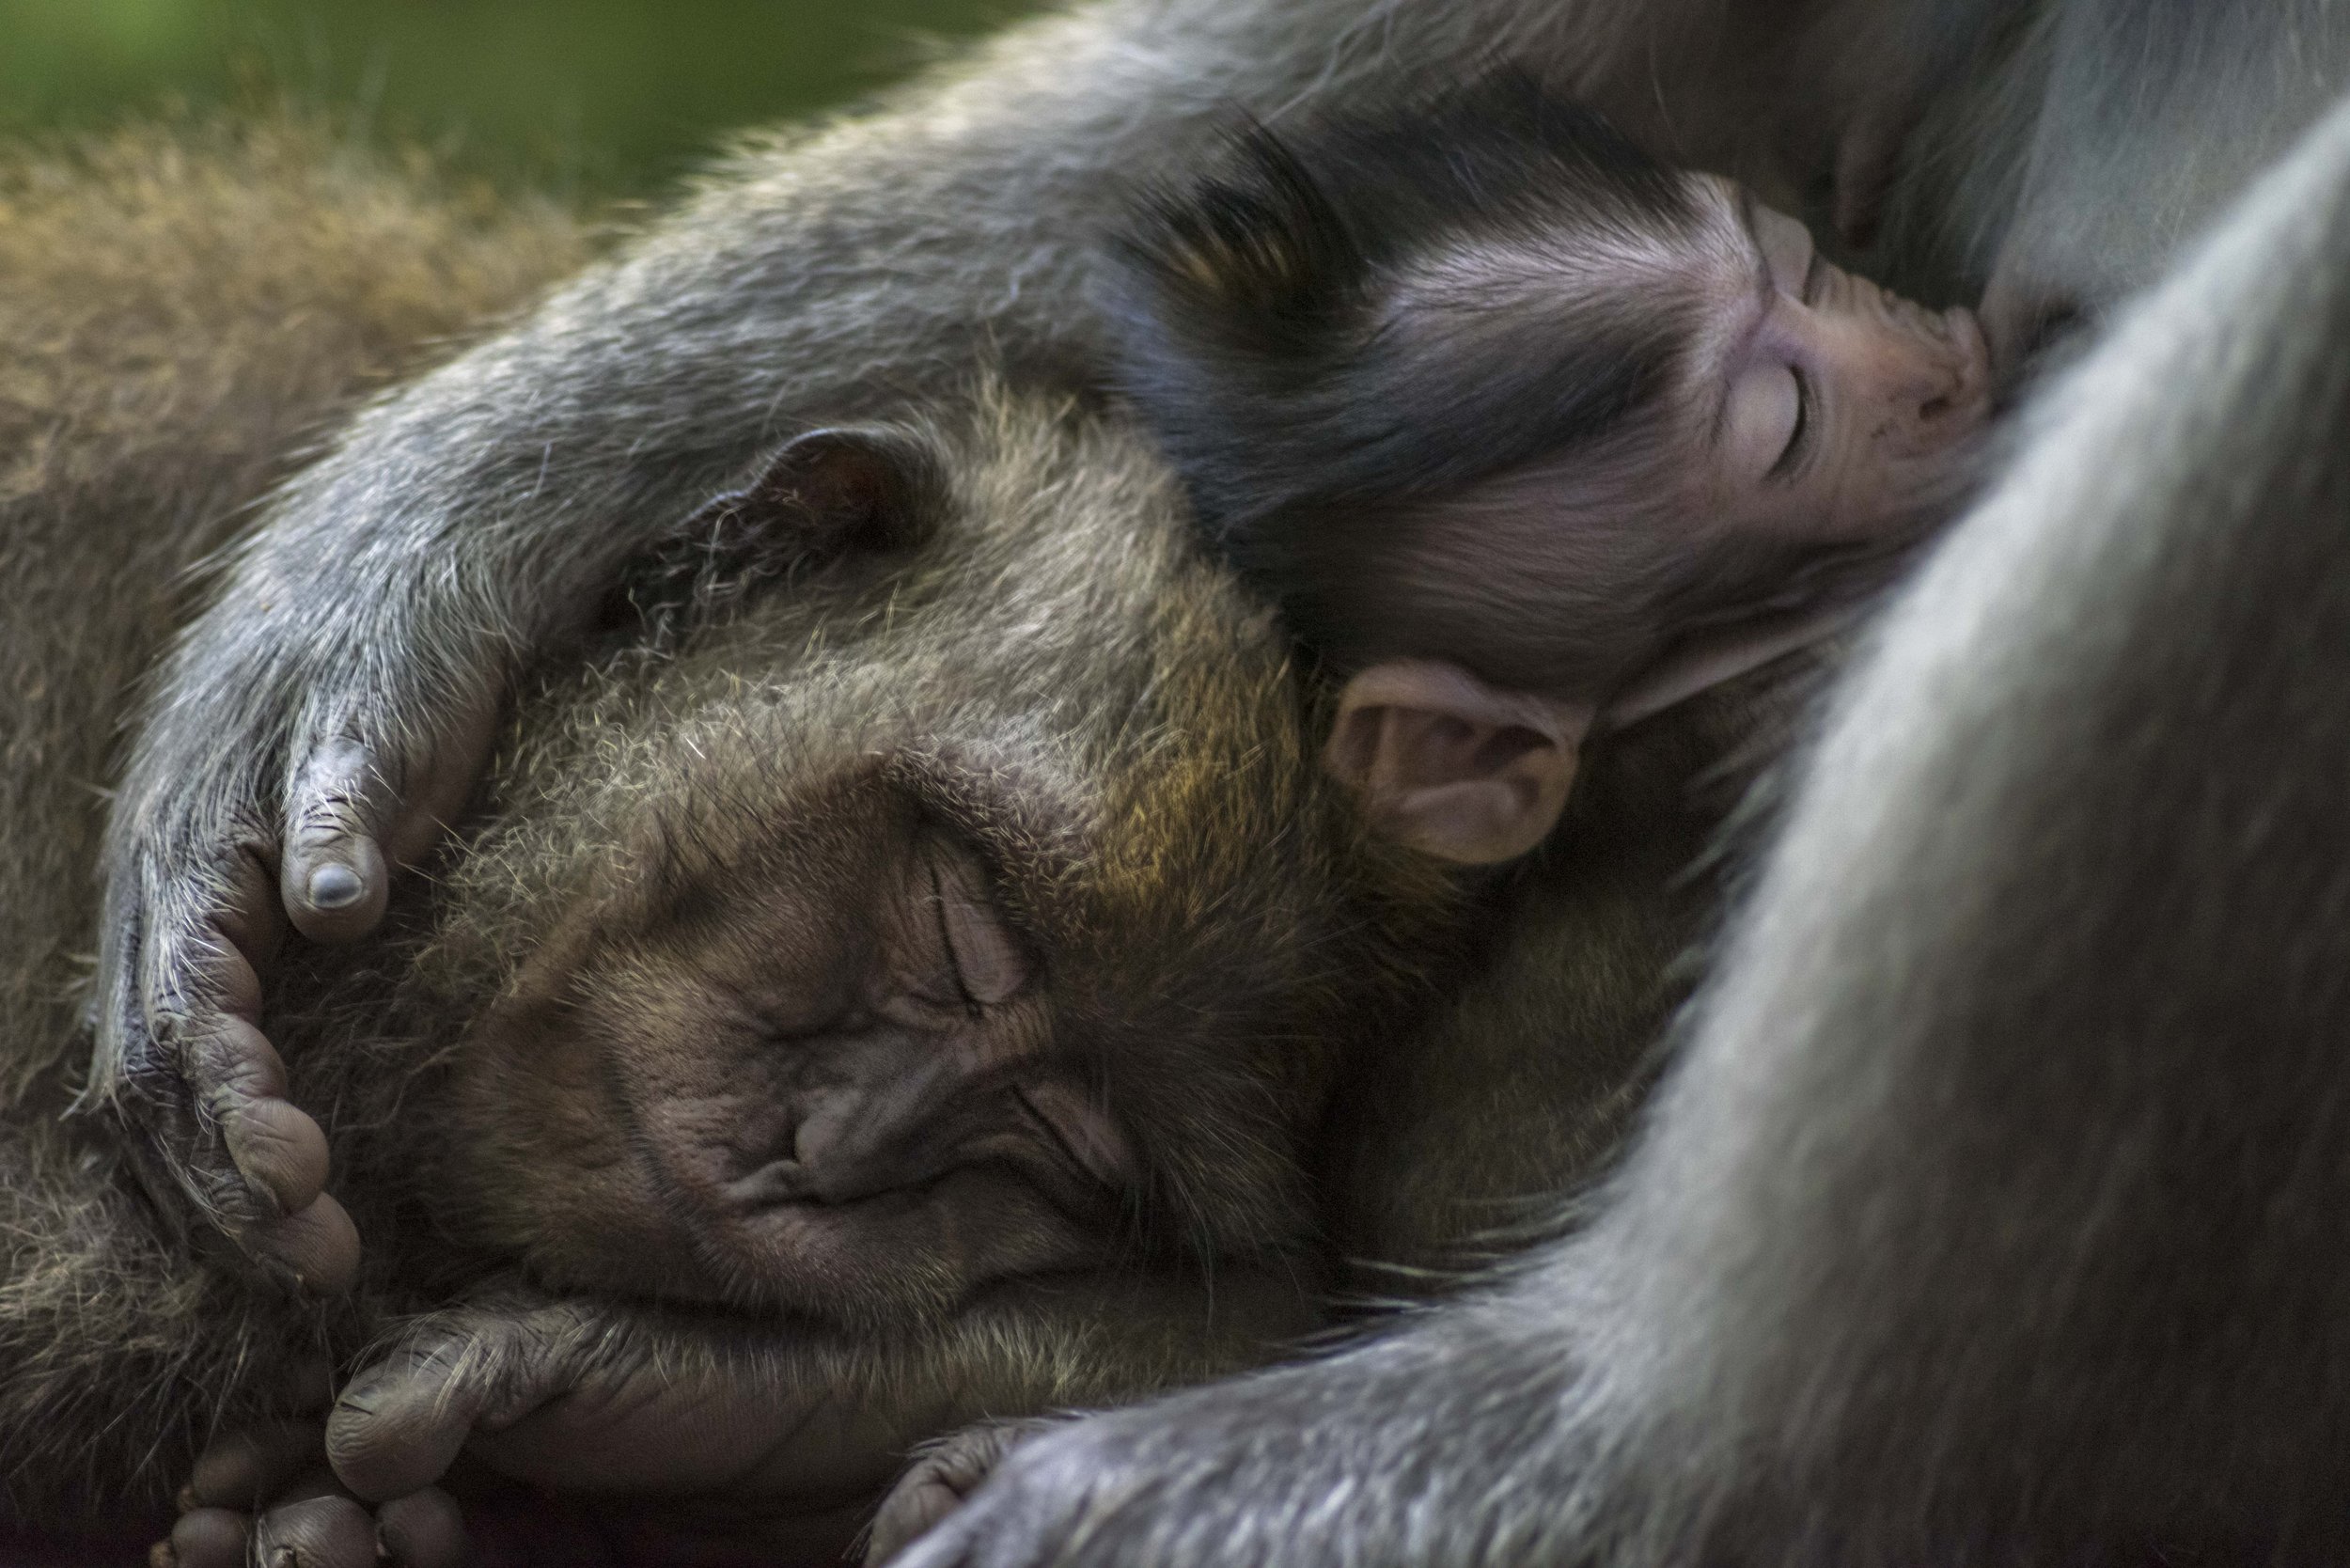 Long-tailed macaques enjoy the warmth of each other during a hot day in Bali, Indonesia.